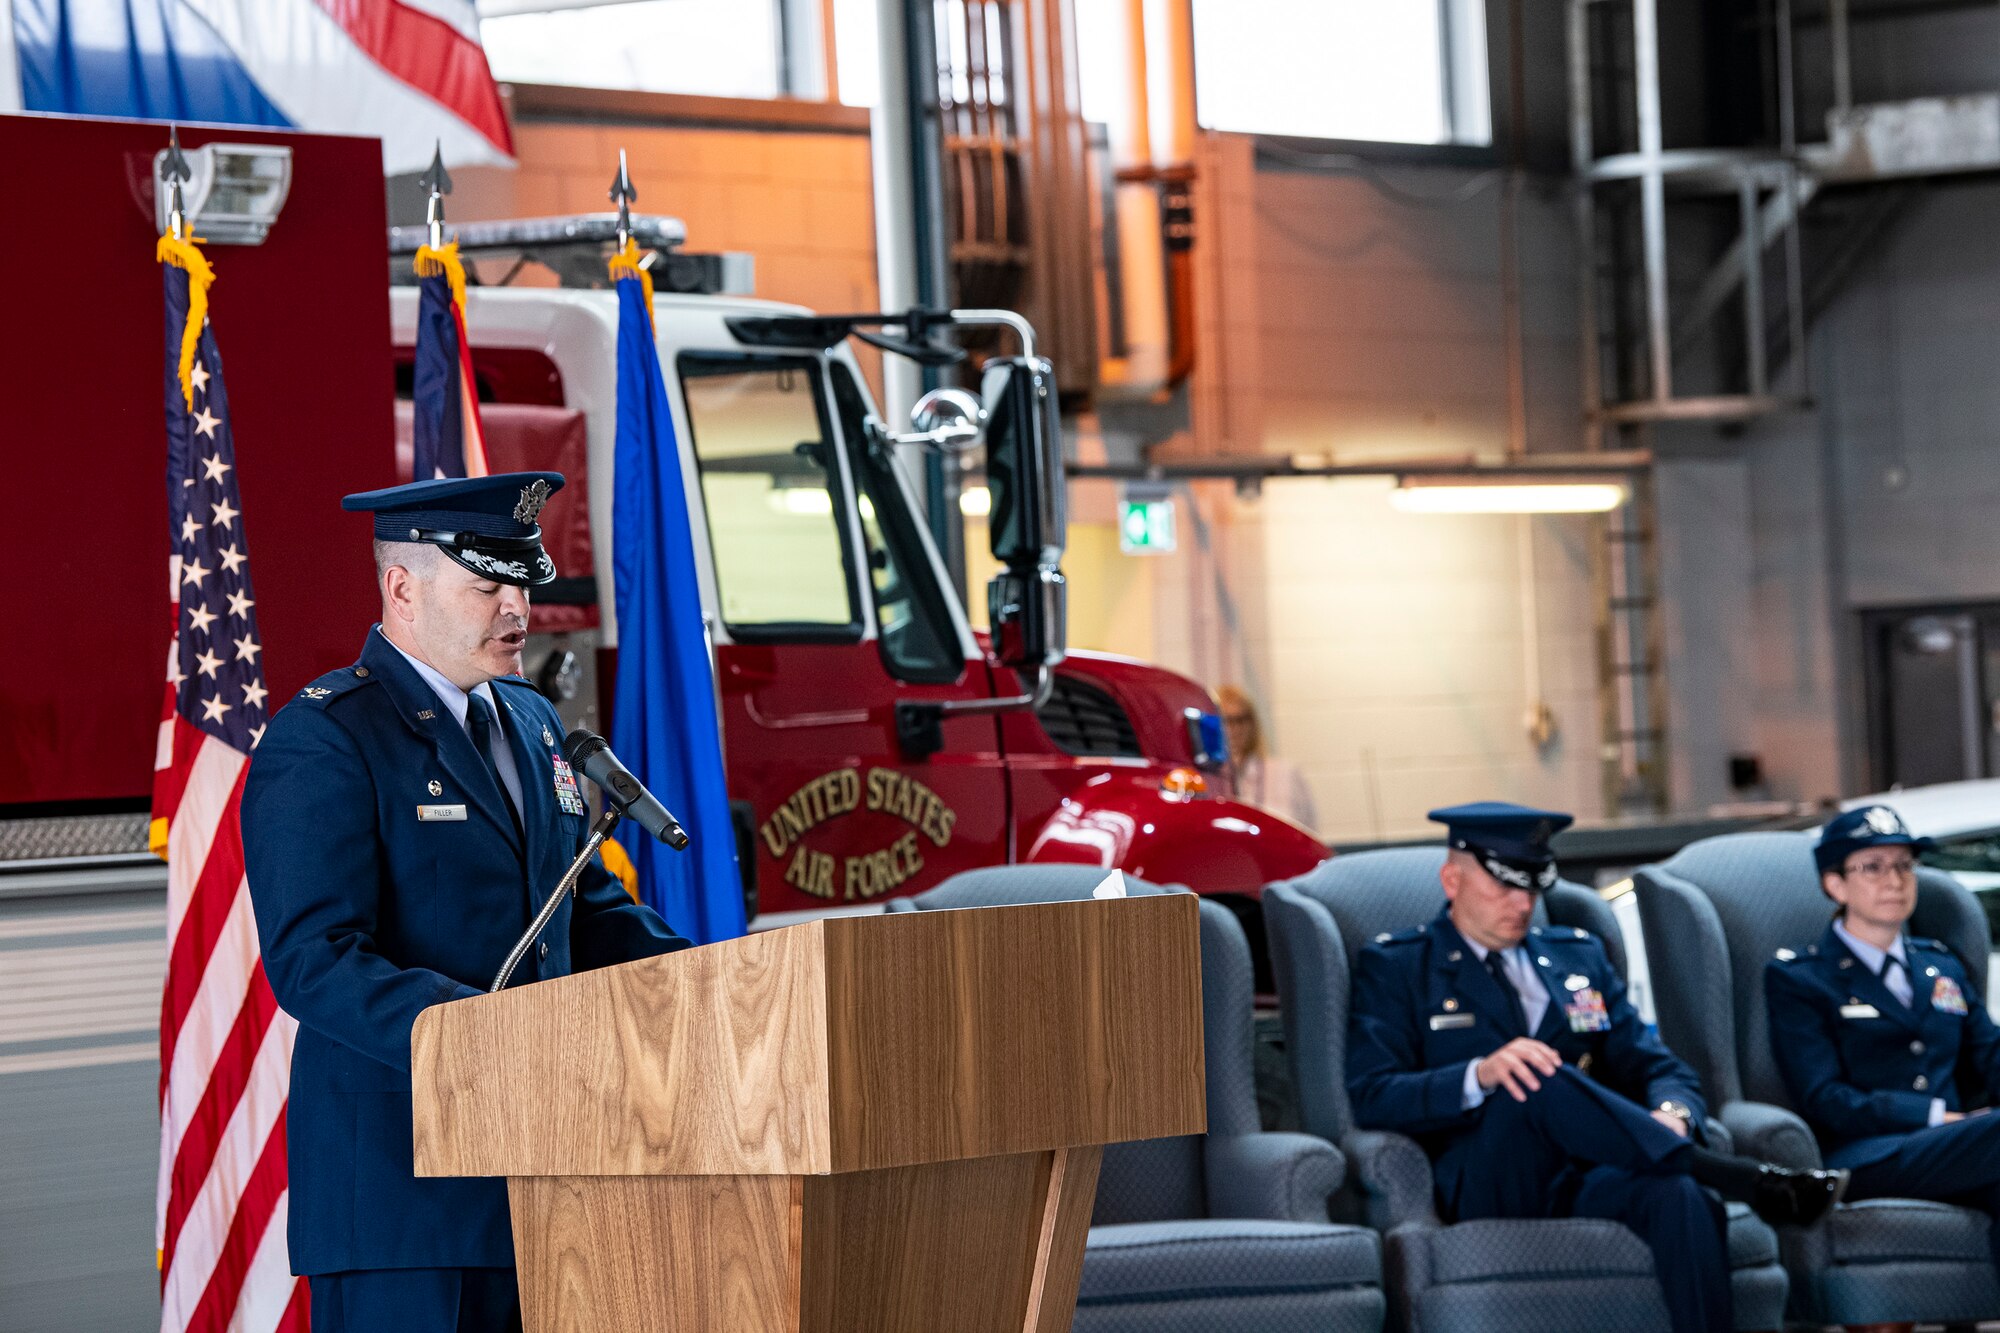 U.S. Air Force Col. Brian Filler, left, 501st Combat Support Wing commander, speaks during a change of command ceremony at RAF Alconbury, England, July 25, 2022. During the ceremony, Col. Richard Martin relinquished command of the 423d Air Base Group to Col. Valarie Long. (U.S. Air Force photo by Staff Sgt. Eugene Oliver)